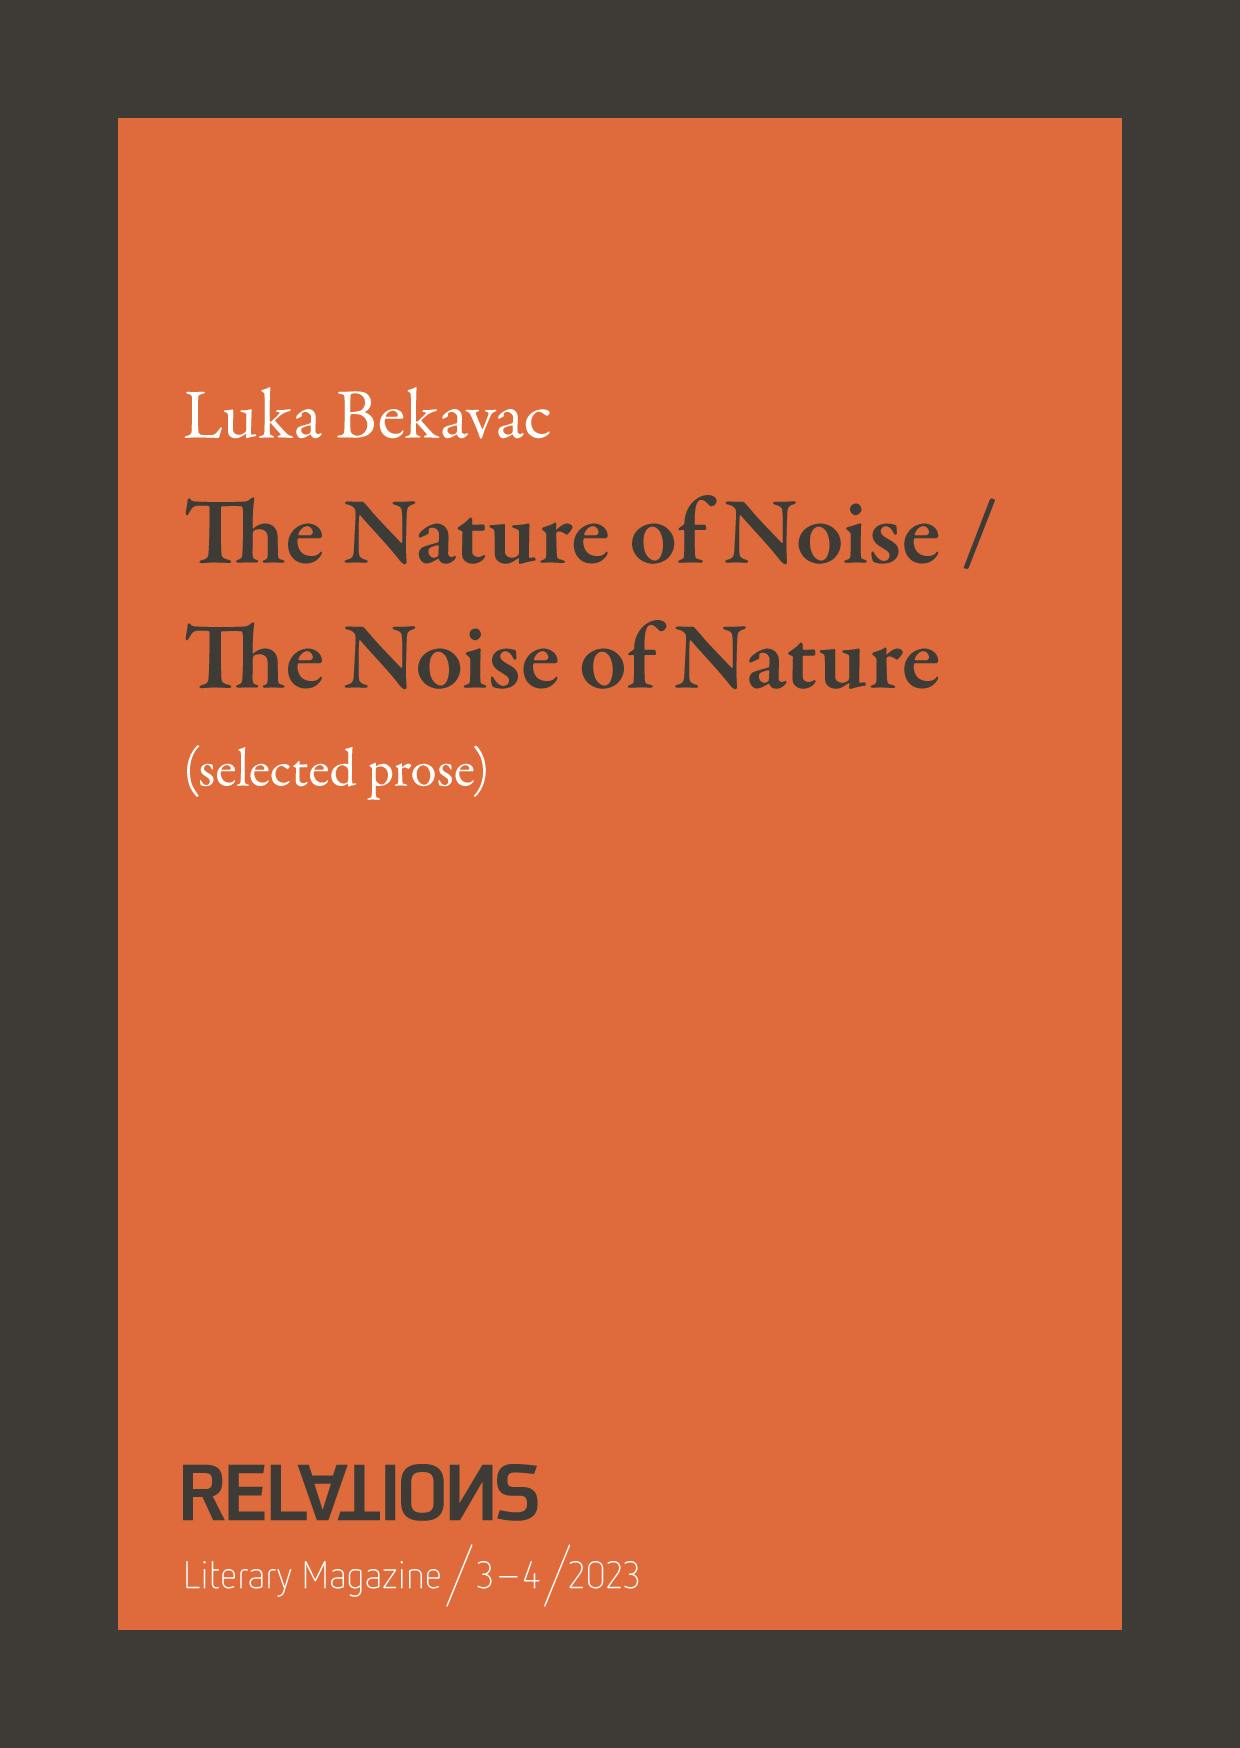 The Nature of Noise / The Noise of Nature